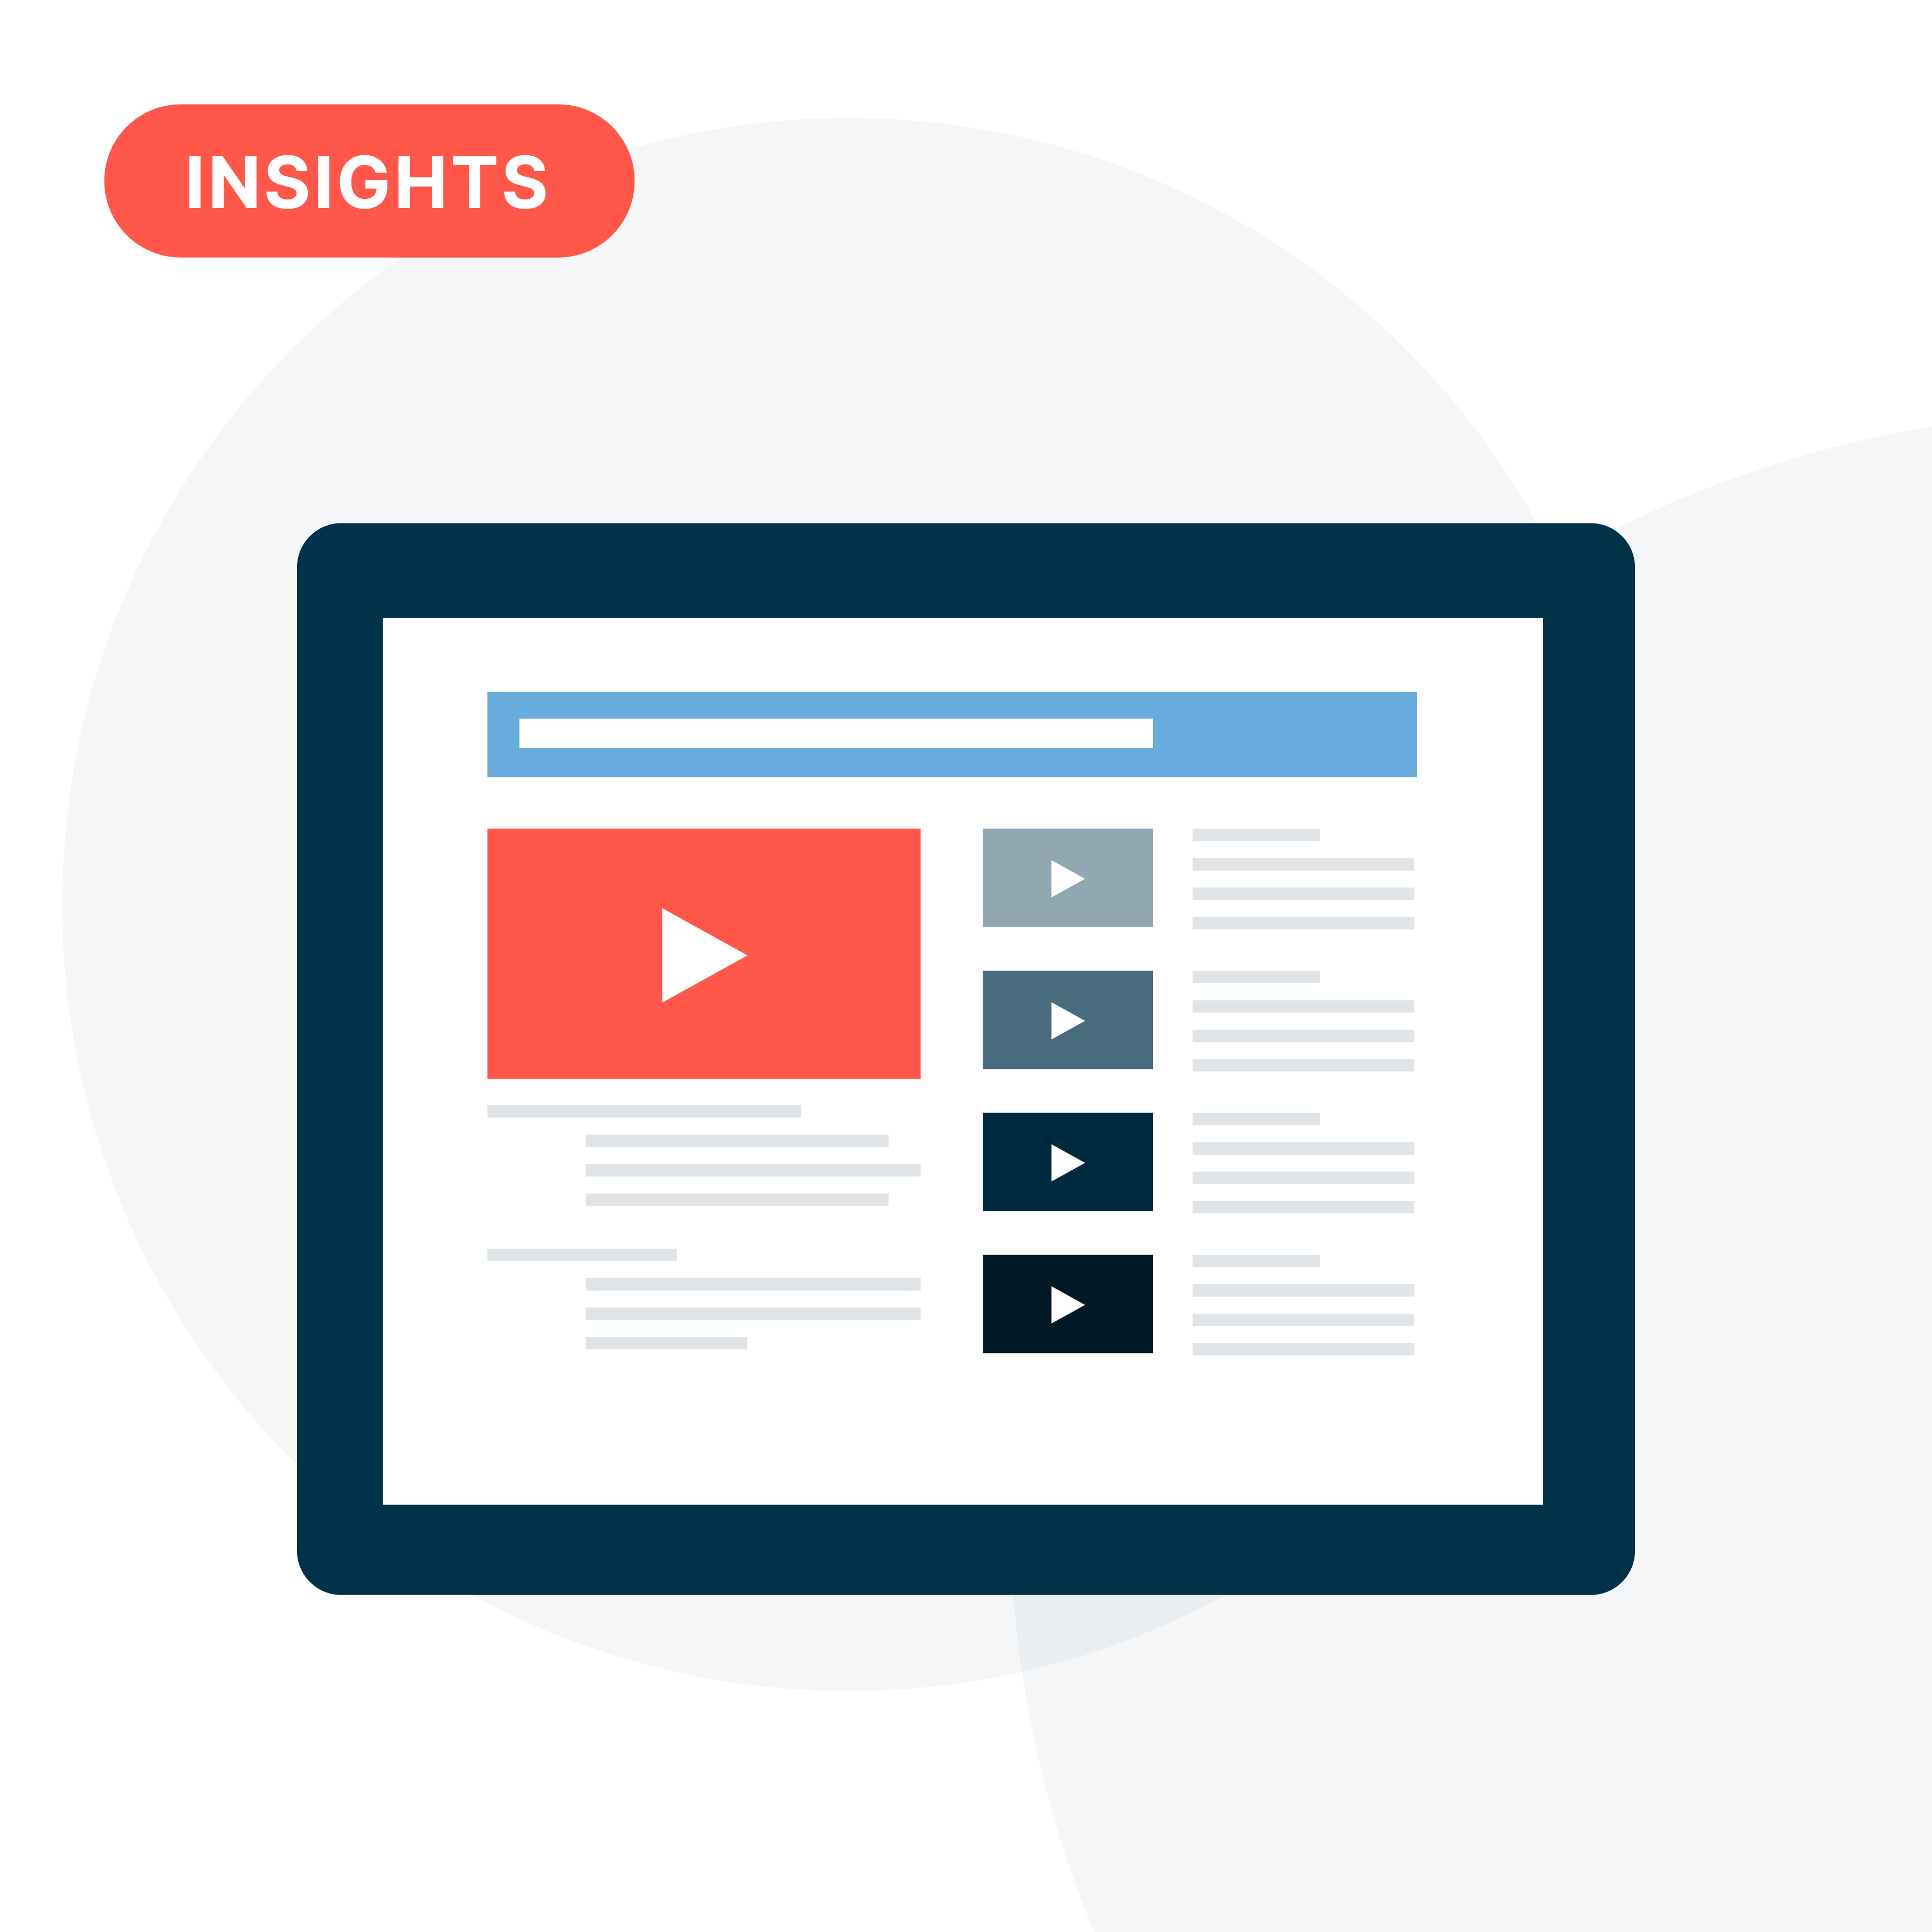 Brand Safety and Suitability Measurement for YouTube